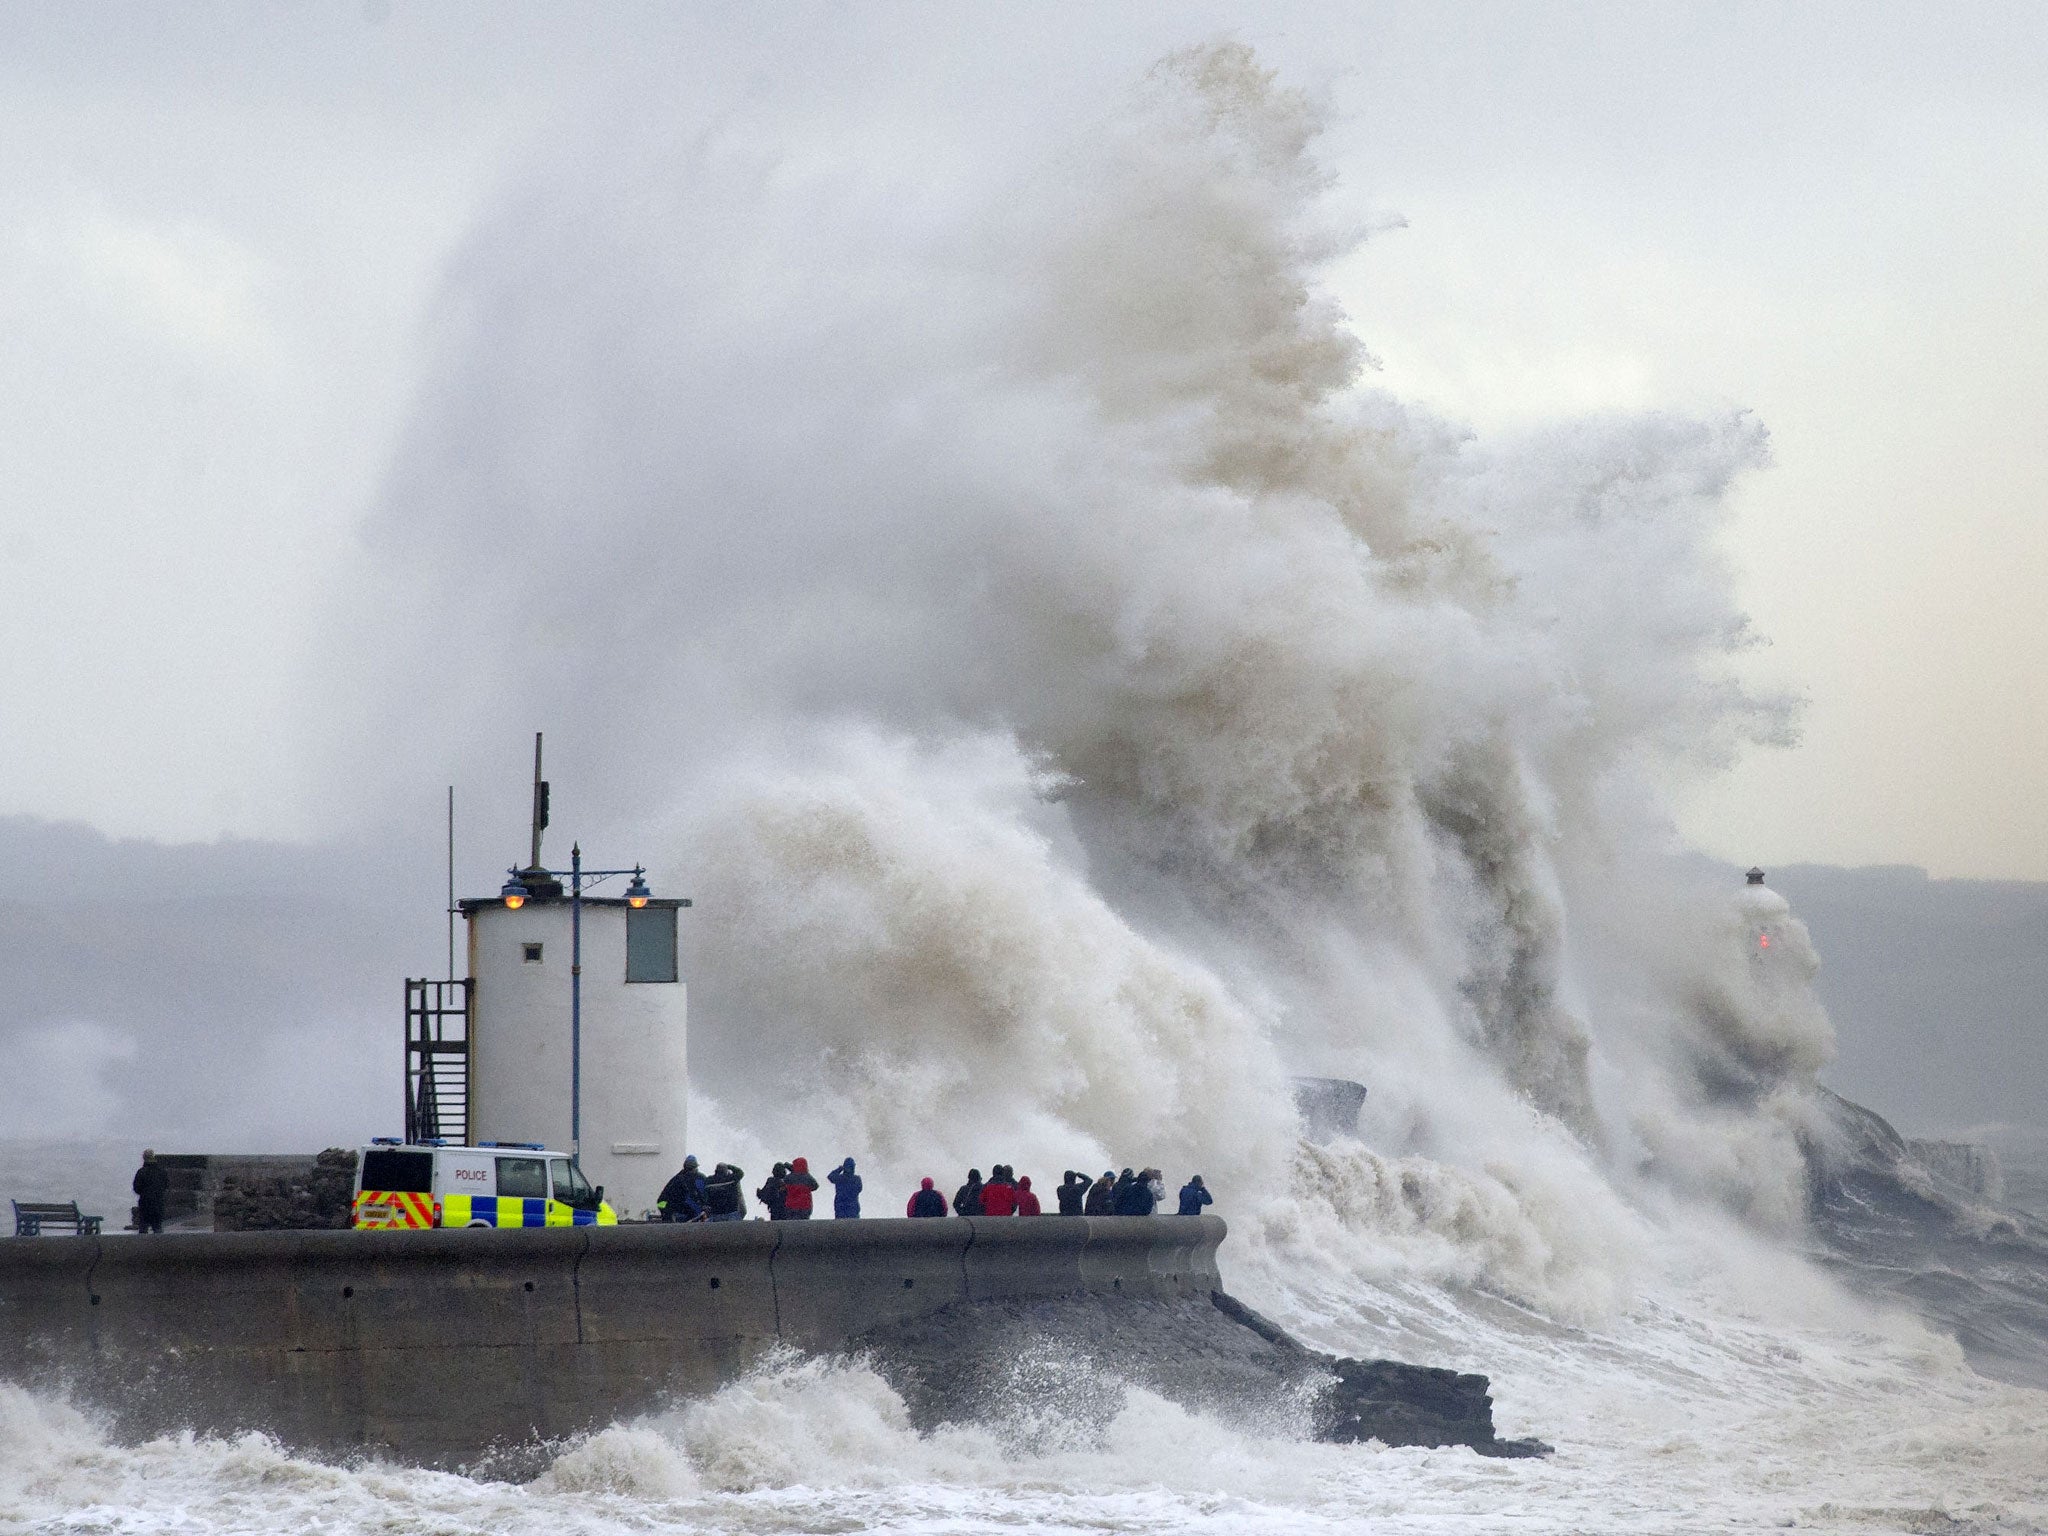 Waves break over the harbour wall at Porthcawl, Wales during a high tide on 5 February, 2014